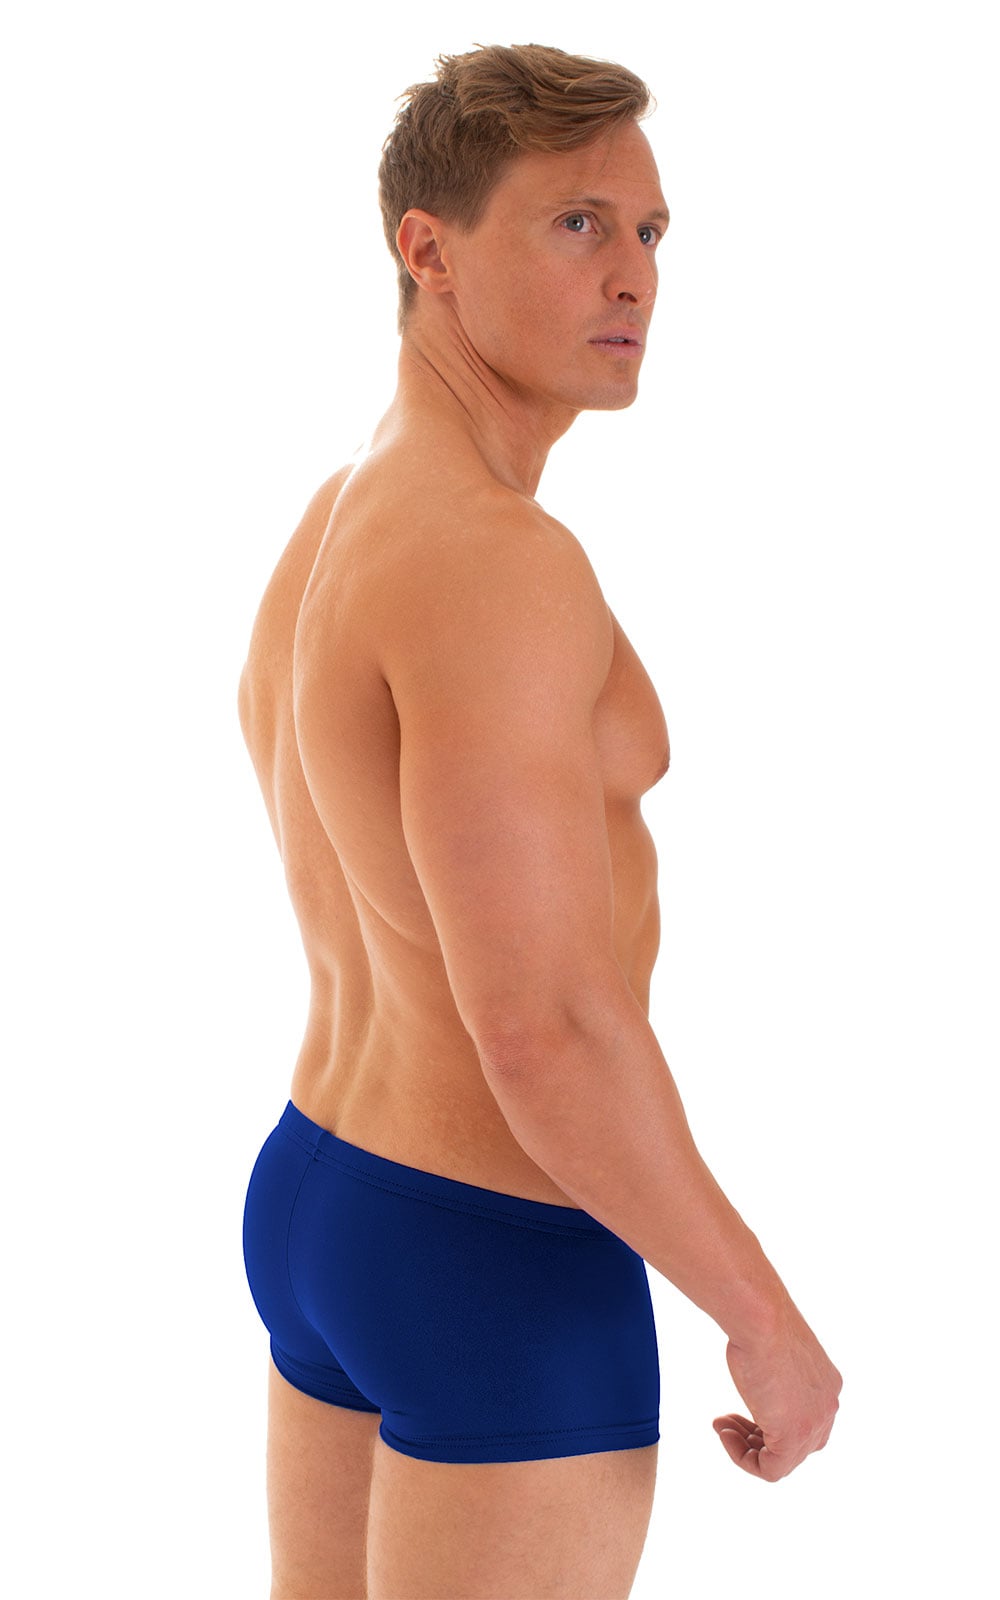 Extreme Low Square Cut Swim Trunks in Semi Sheer ThinSKINZ Royal Blue, Rear View